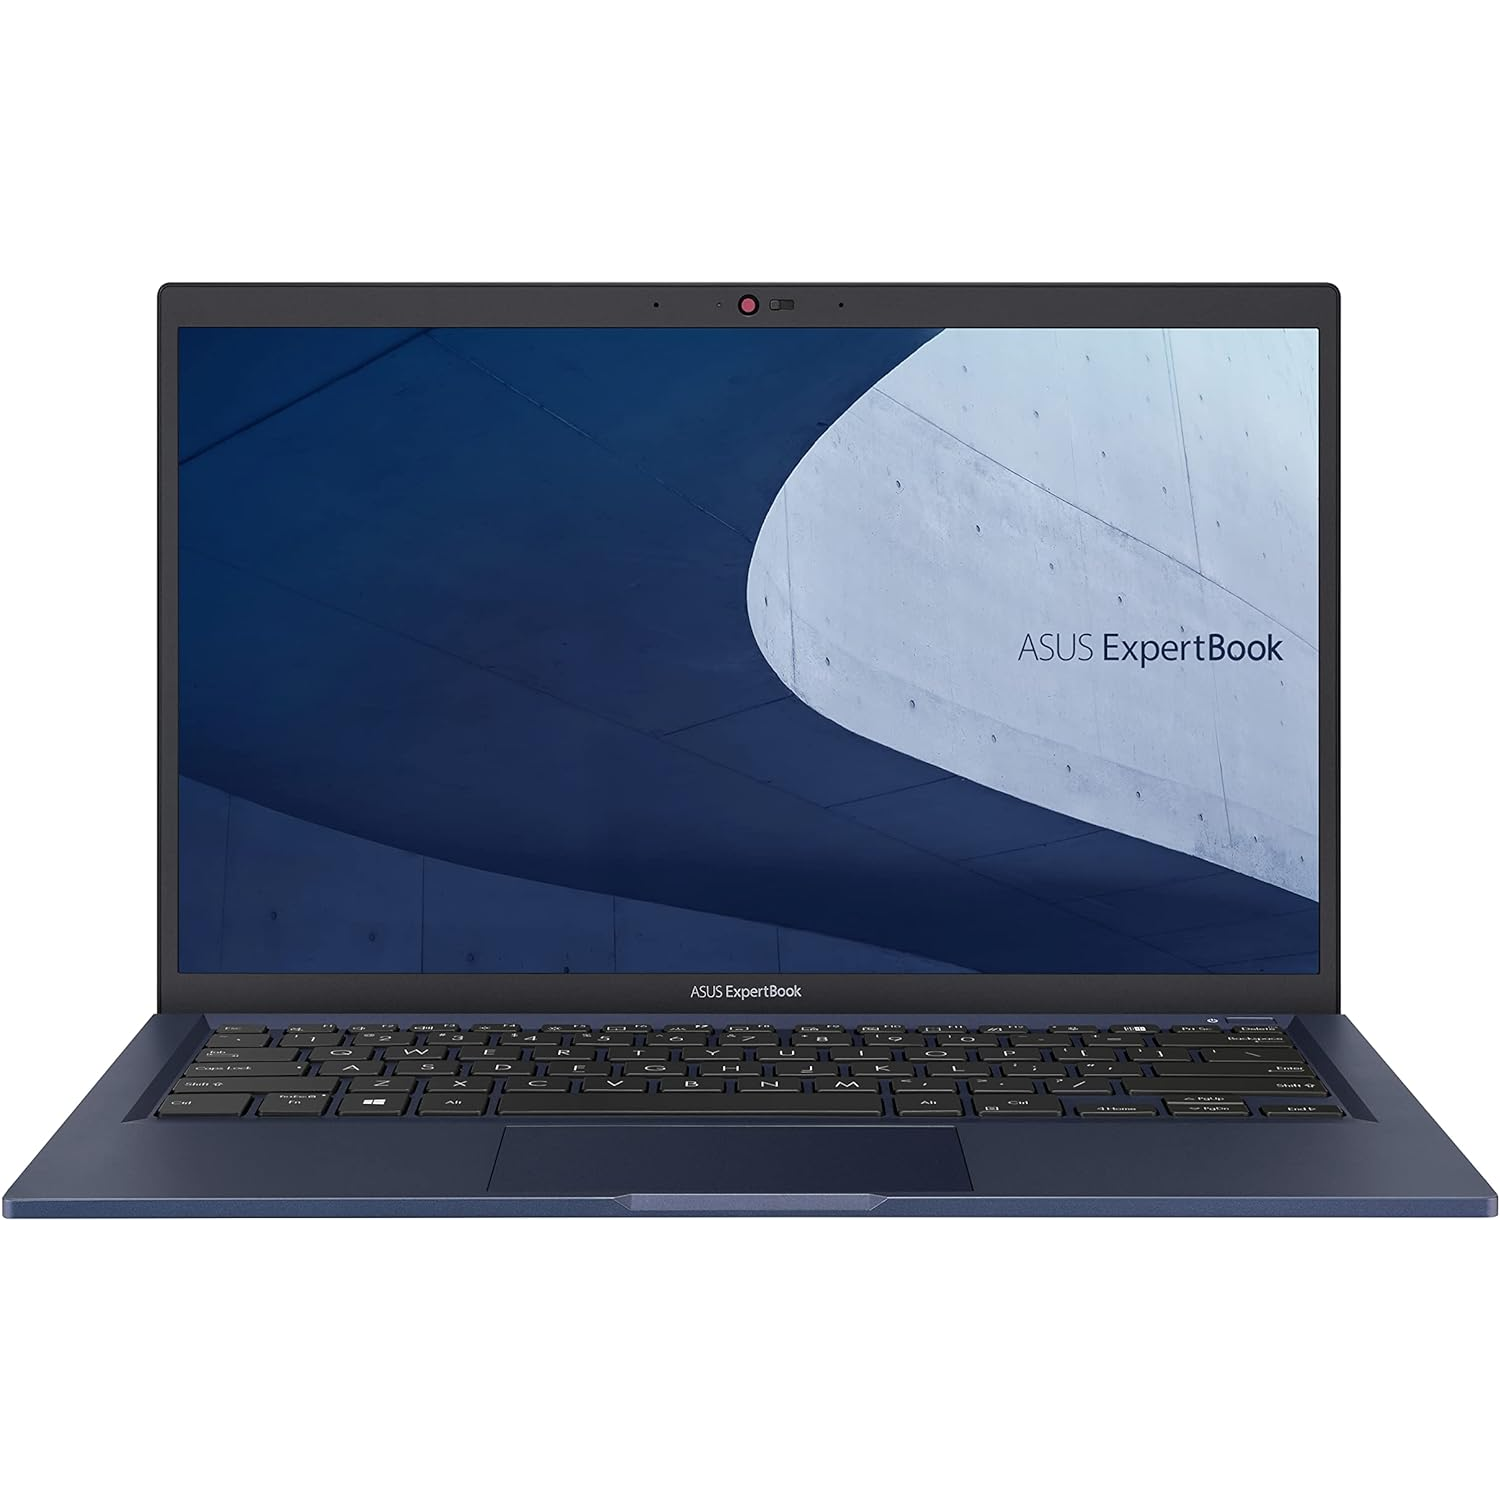 Asus ExpertBook B1 14" FHD, Intel i5-1135G7 (4-Cores) 16GB RAM, 2TB NVMe SSD, WiFi 6, Military Grade Business Laptop, Win 10 Pro (upgradable to 11)